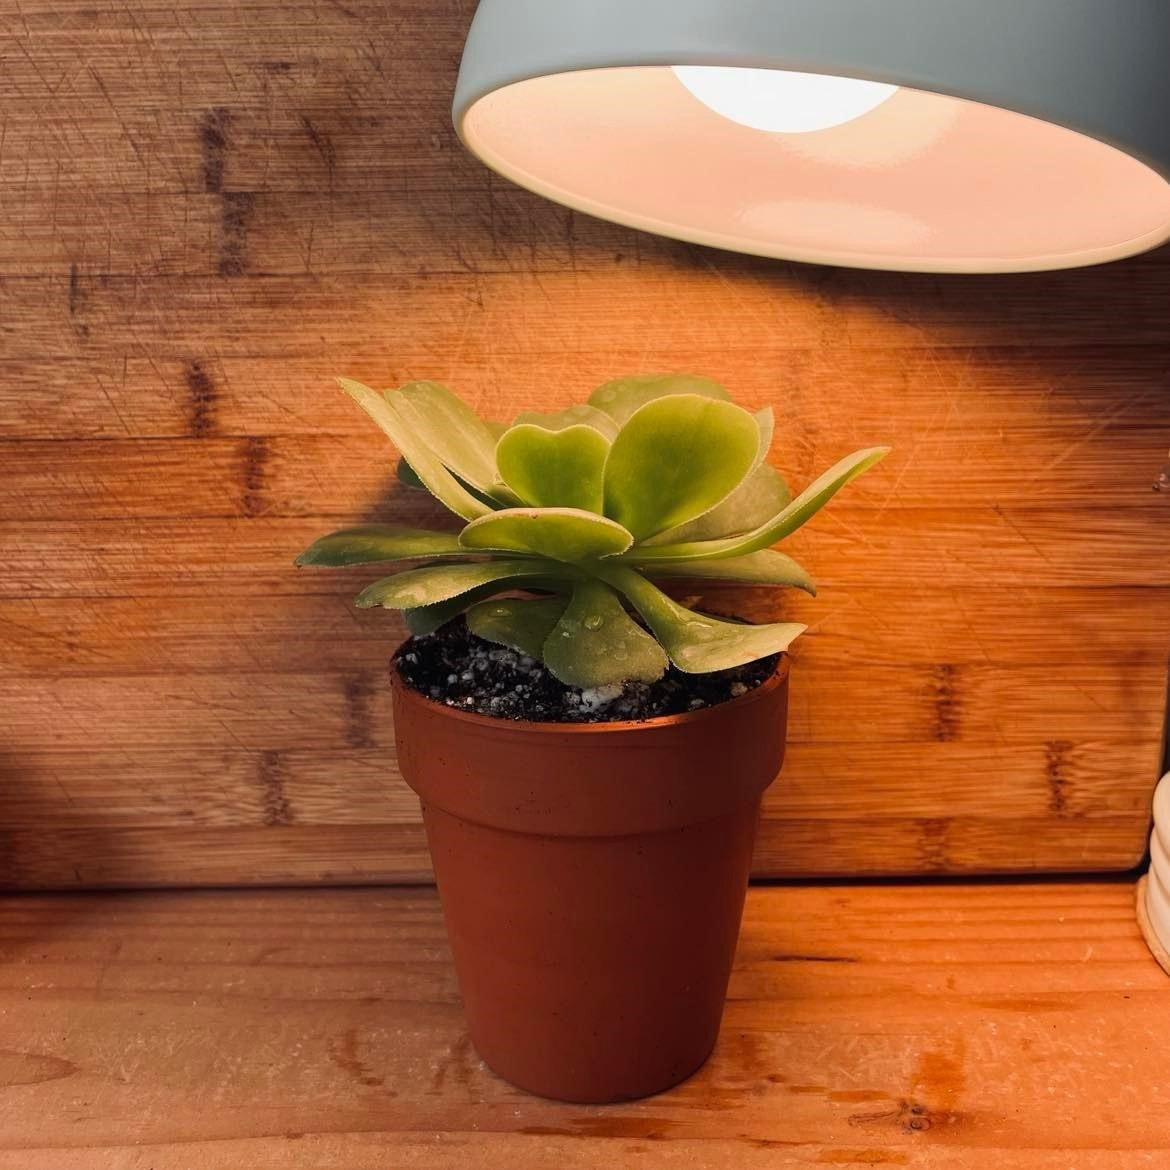 Things to Know for Growing Succulents under Artificial or Grow Lights